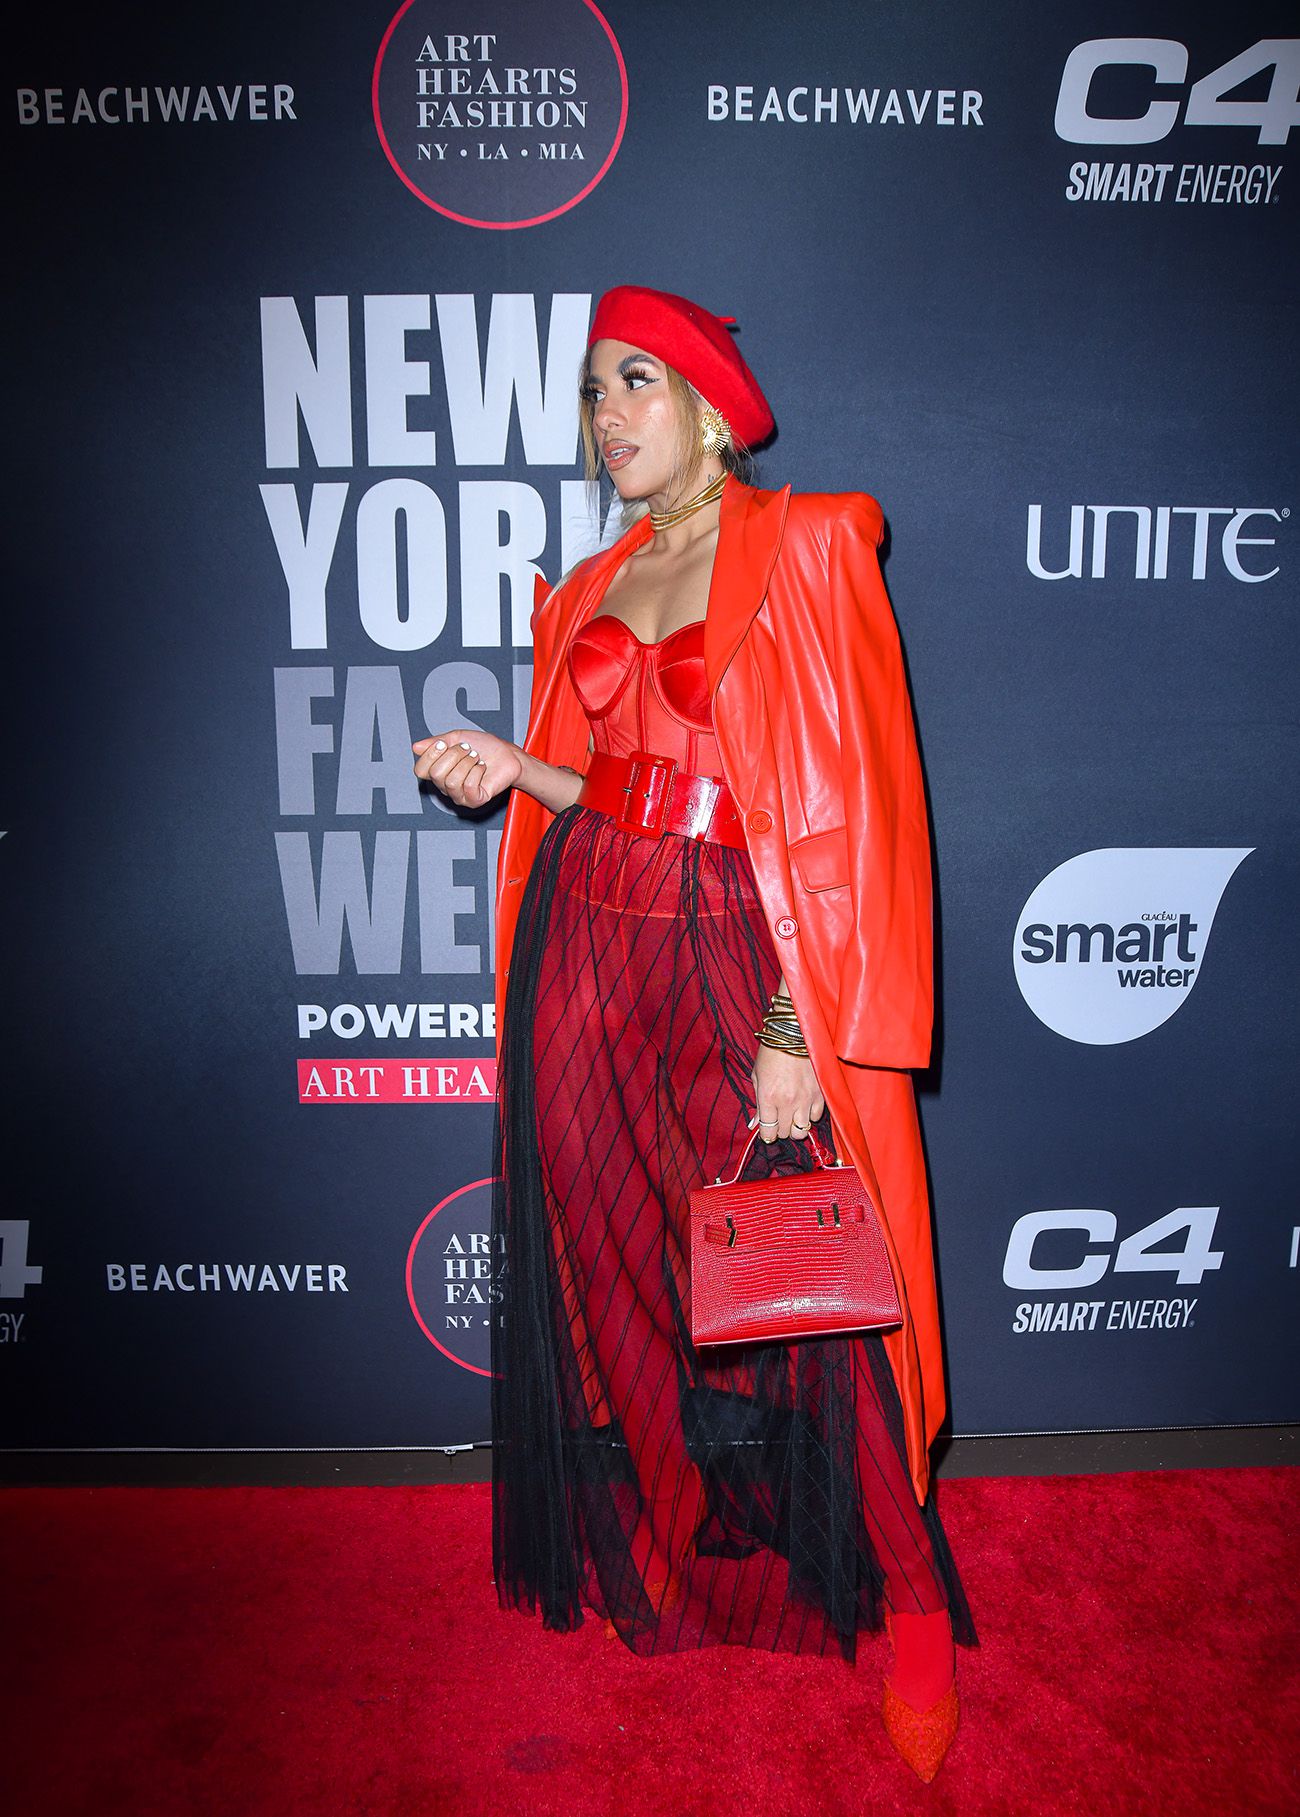 NEW YORK, NEW YORK - FEBRUARY 08: Lela Espinal arrives on the red carpet during New York Fashion Week Powered by Art Hearts Fashion at The Angel Orensanz Foundation on February 08, 2024 in New York City.  (Photo by Mark Gunter/Getty Images for Art Hearts Fashion)